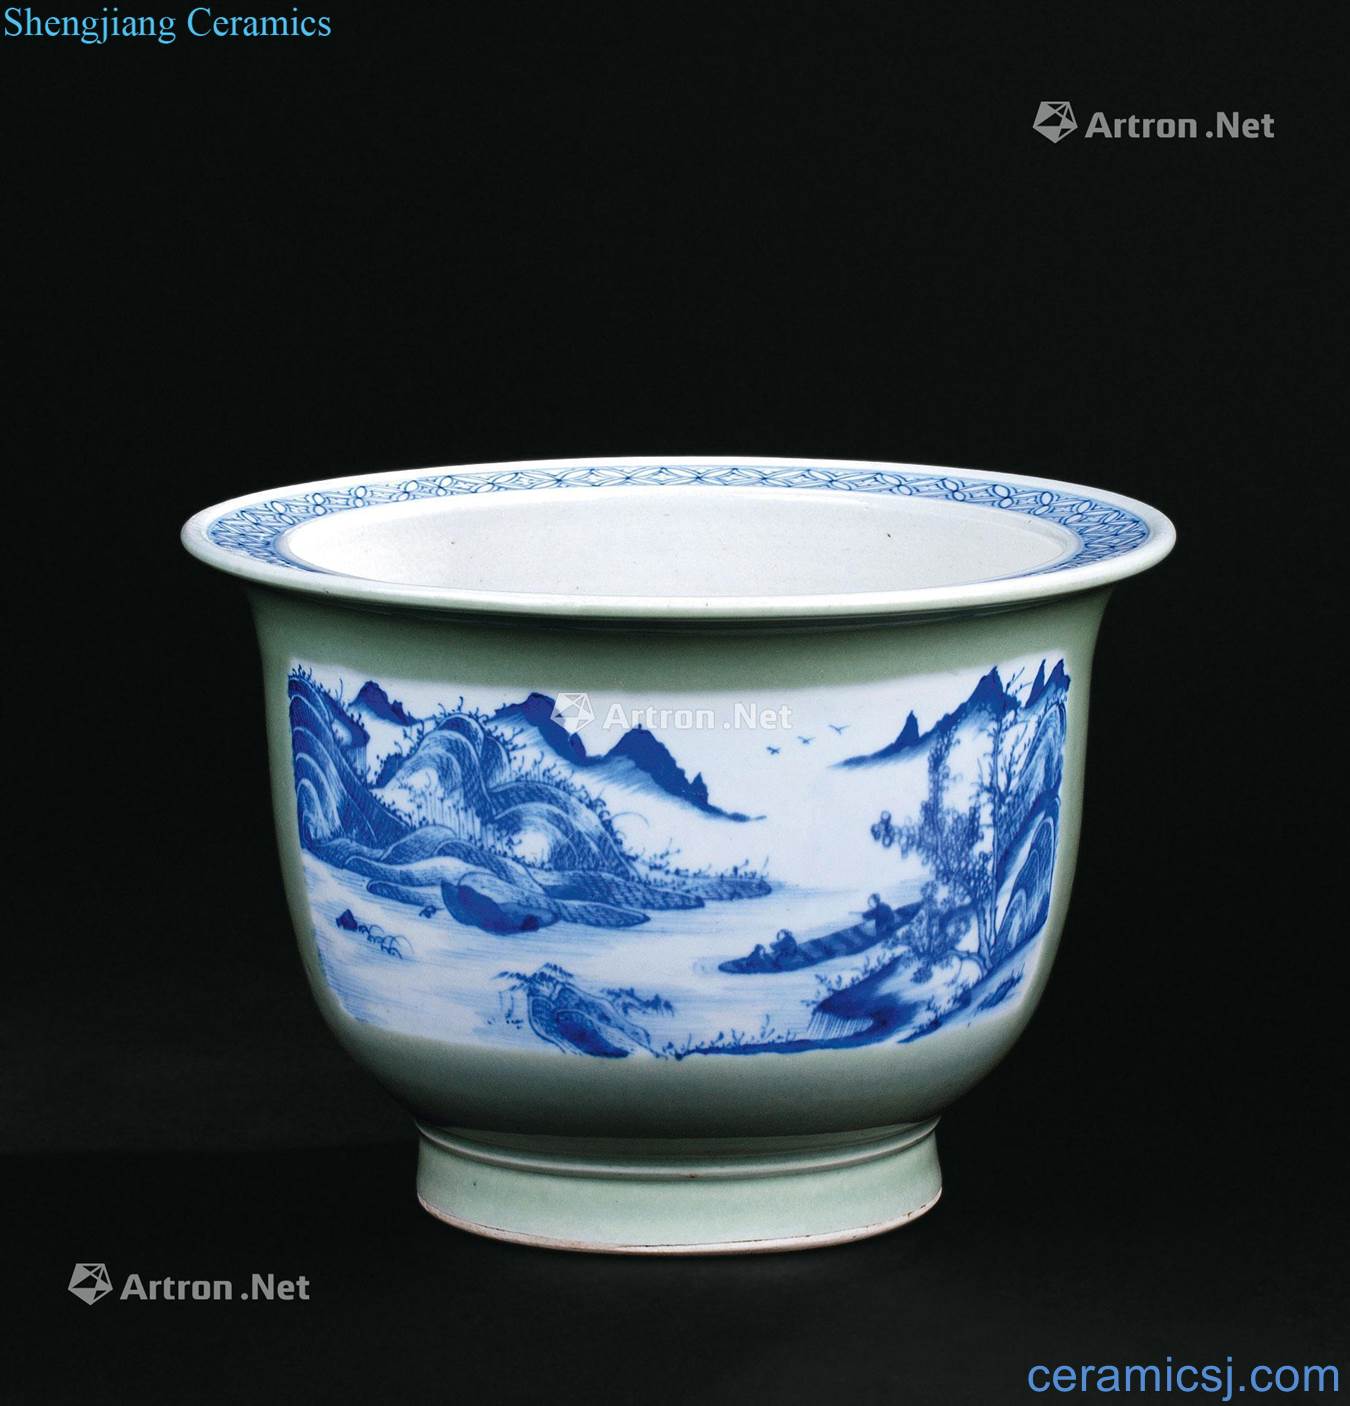 The qing emperor kangxi (1662-1722), pea green to blue and white medallion landscape pattern flowerpot